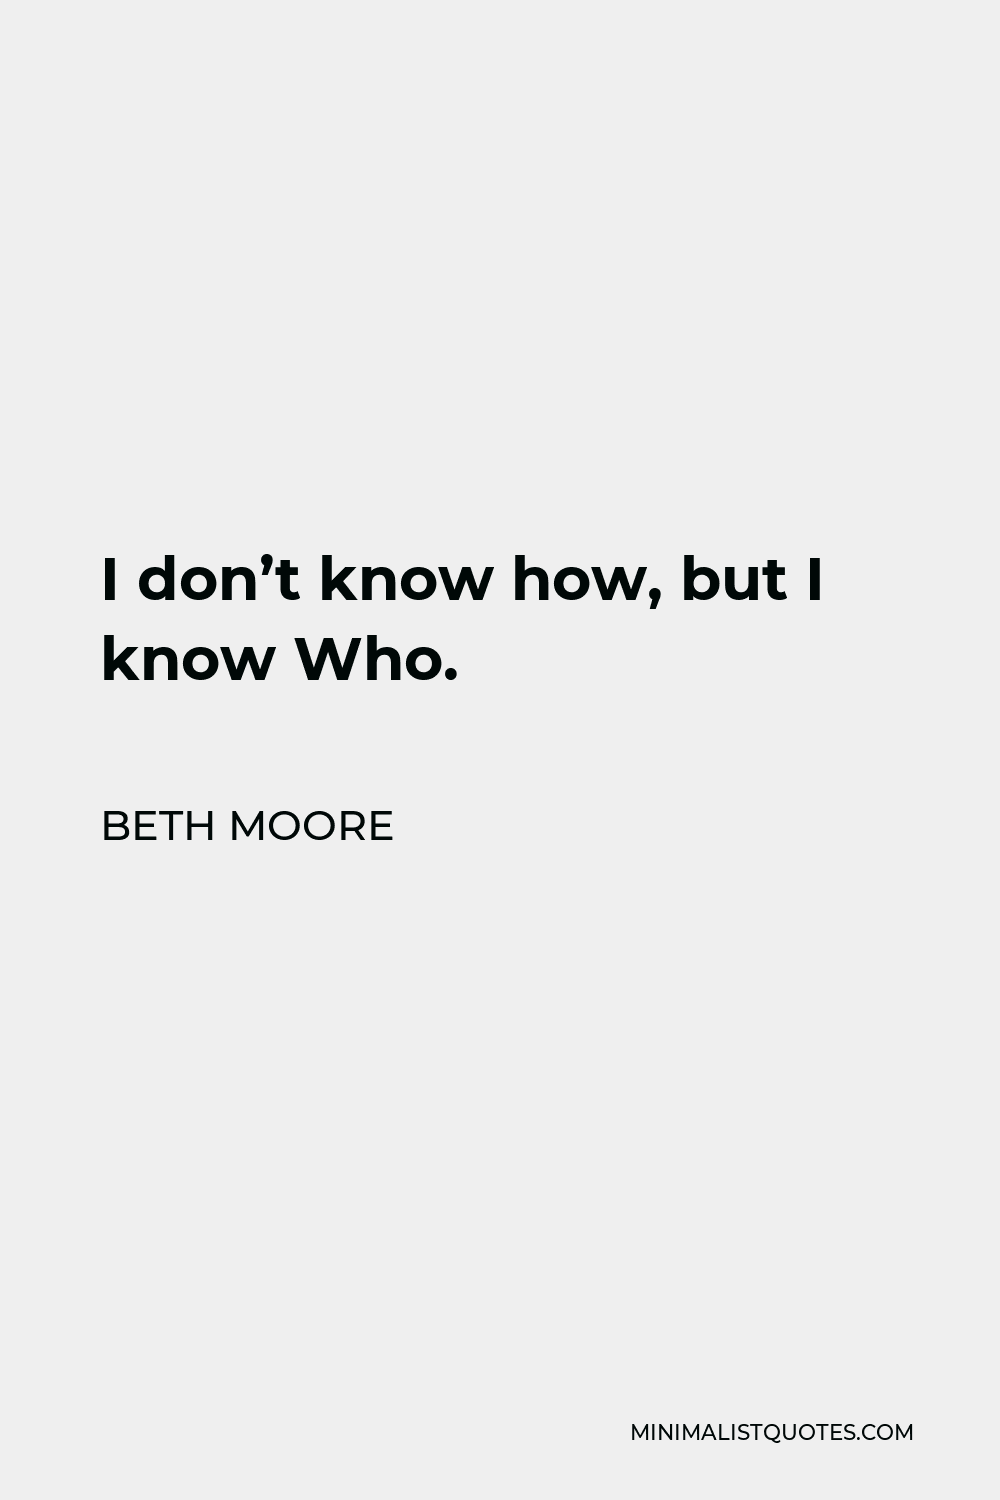 Beth Moore Quote - I don’t know how, but I know Who.